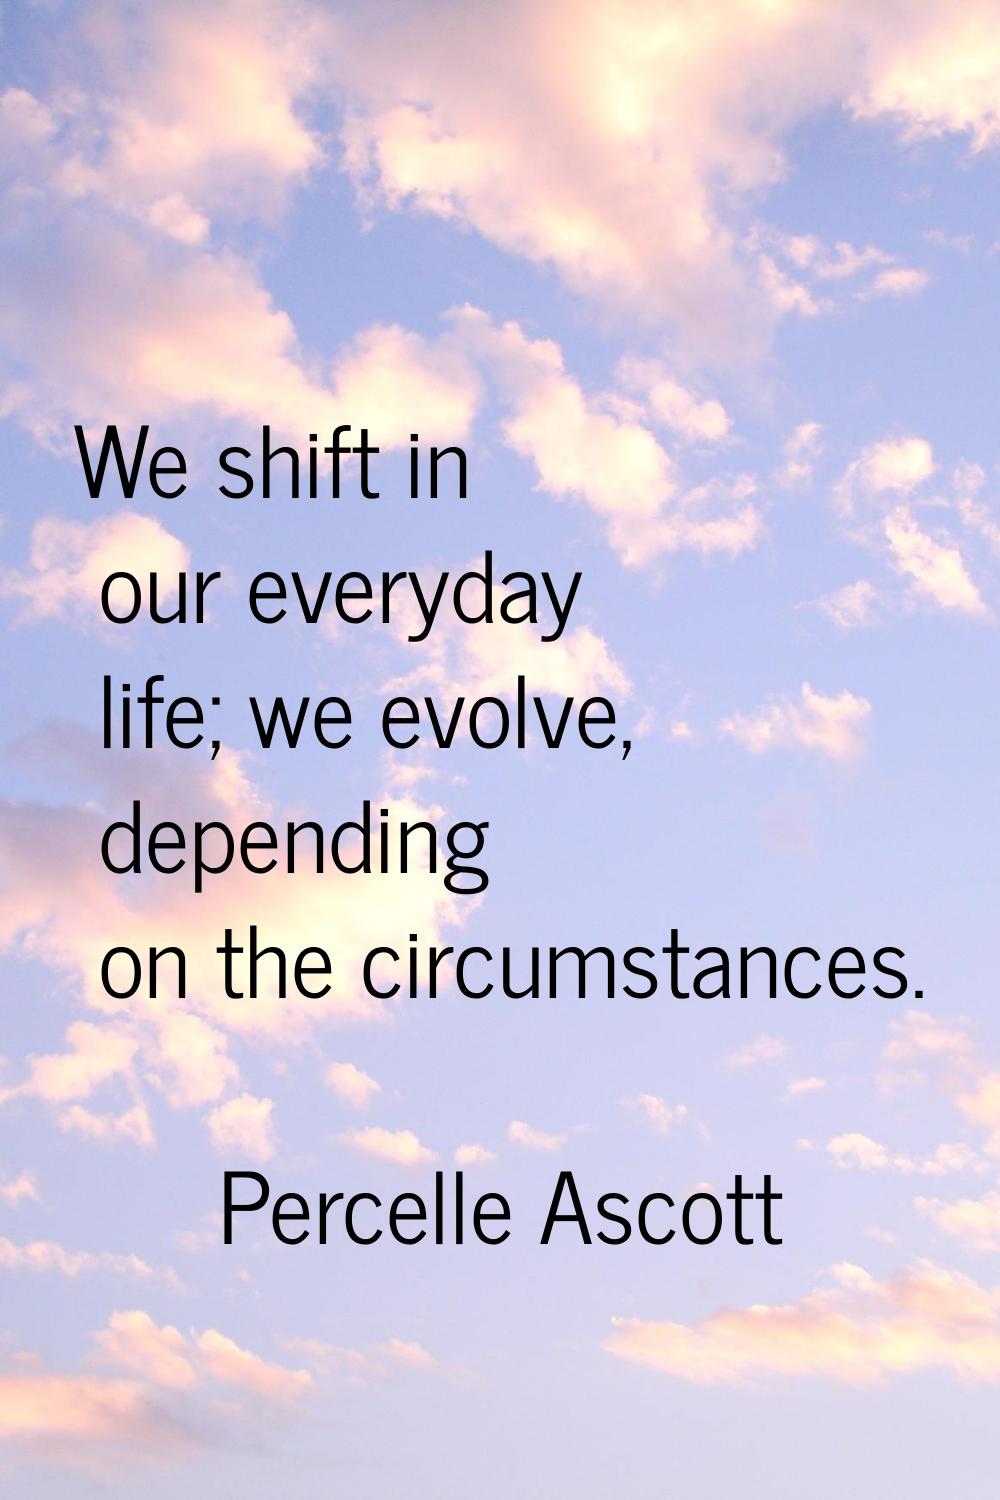 We shift in our everyday life; we evolve, depending on the circumstances.